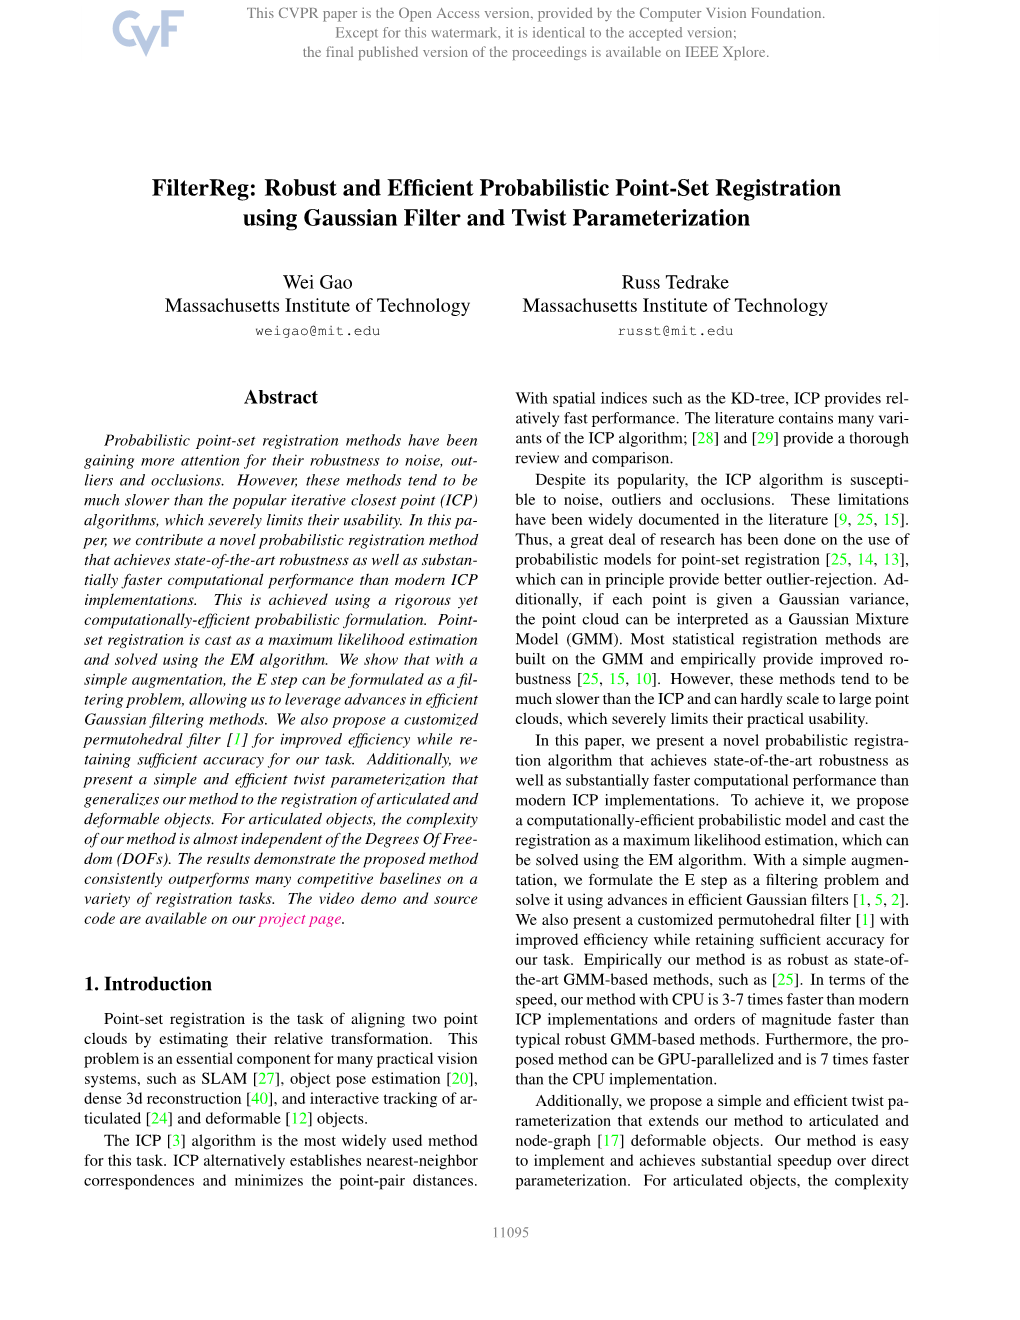 Filterreg: Robust and Efficient Probabilistic Point-Set Registration Using Gaussian Filter and Twist Parameterization